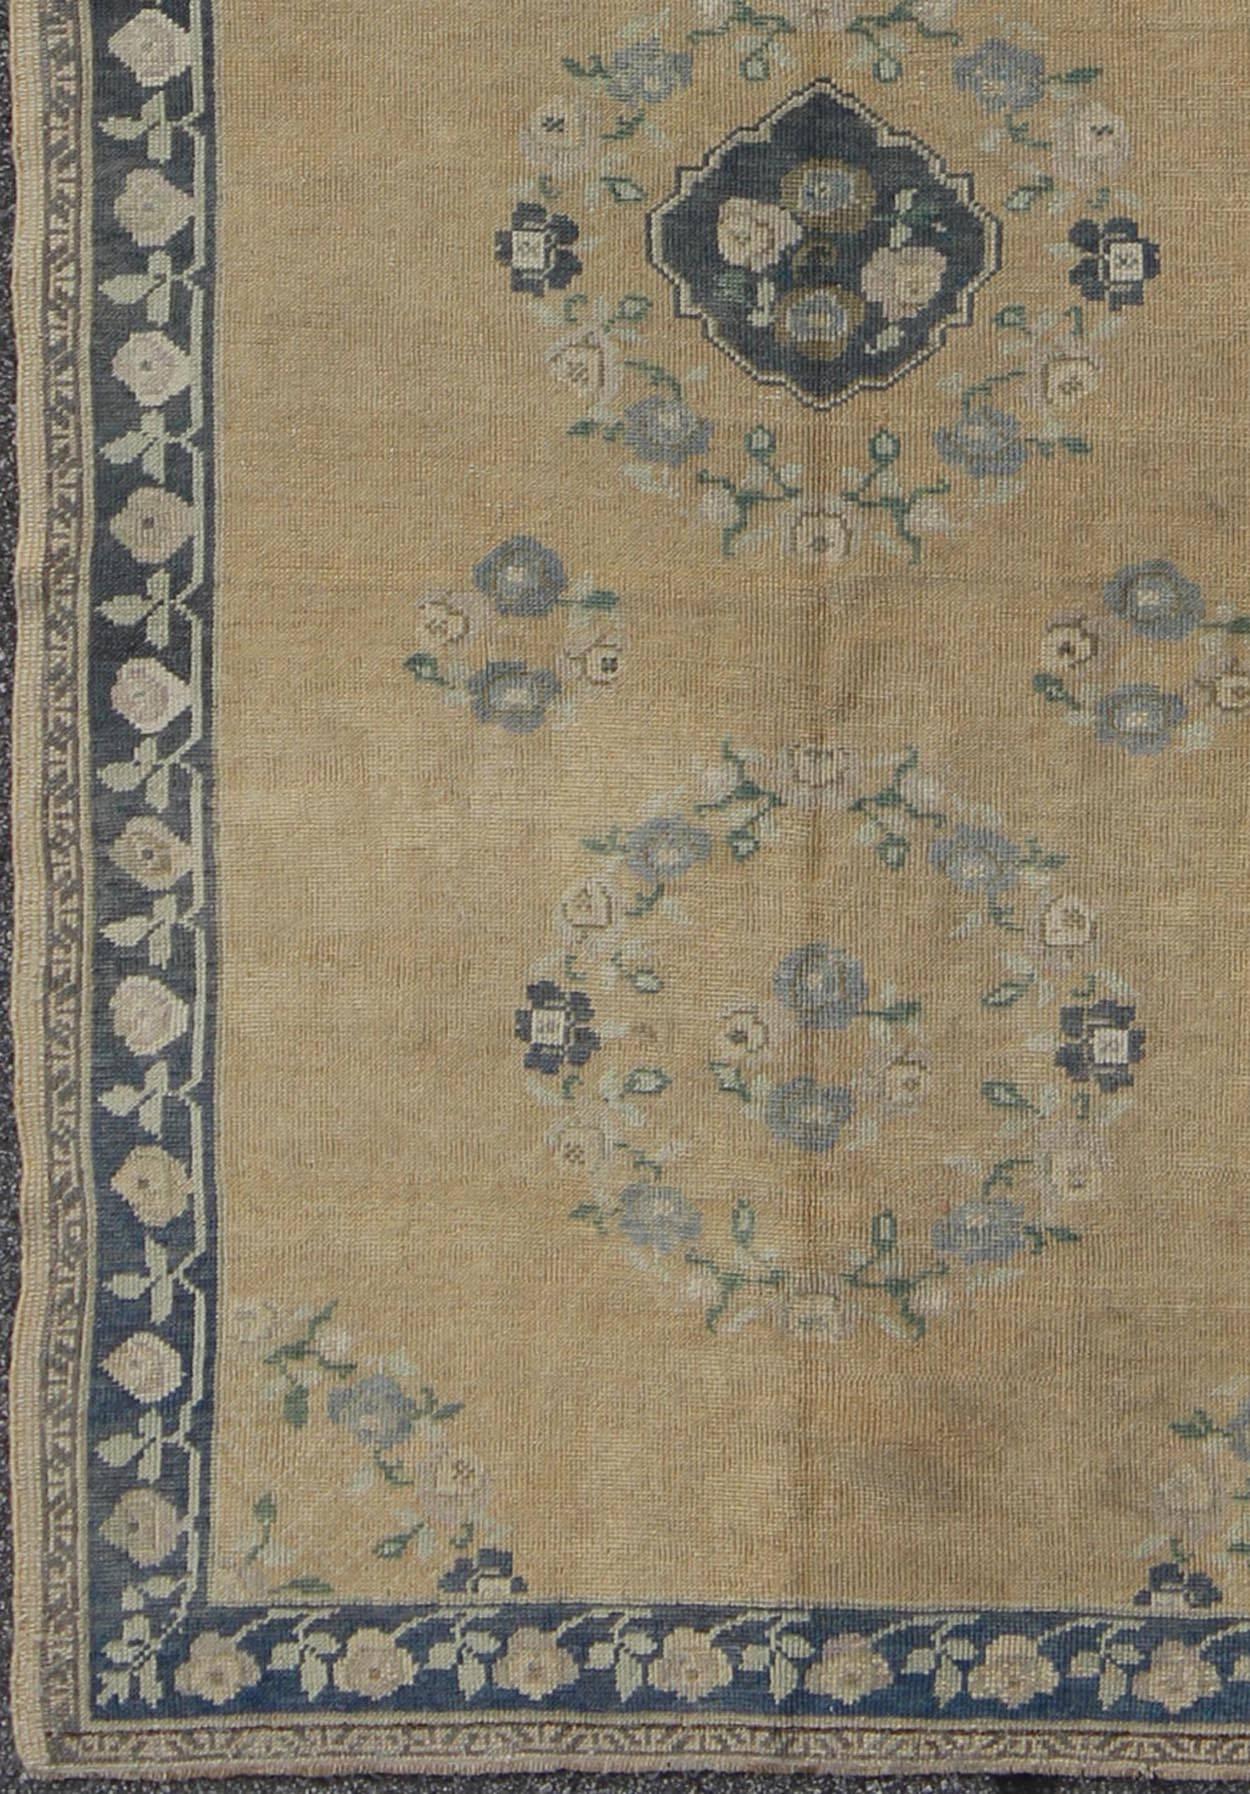  Gallery Rug from Mid-20th Century Turkey with Floral Design
rug/en-86026  origin/turkey 

This beautiful vintage Oushak runner from mid-20th century Turkey features a Classic Oushak design. The faint buttery ground is home to four elegant floral